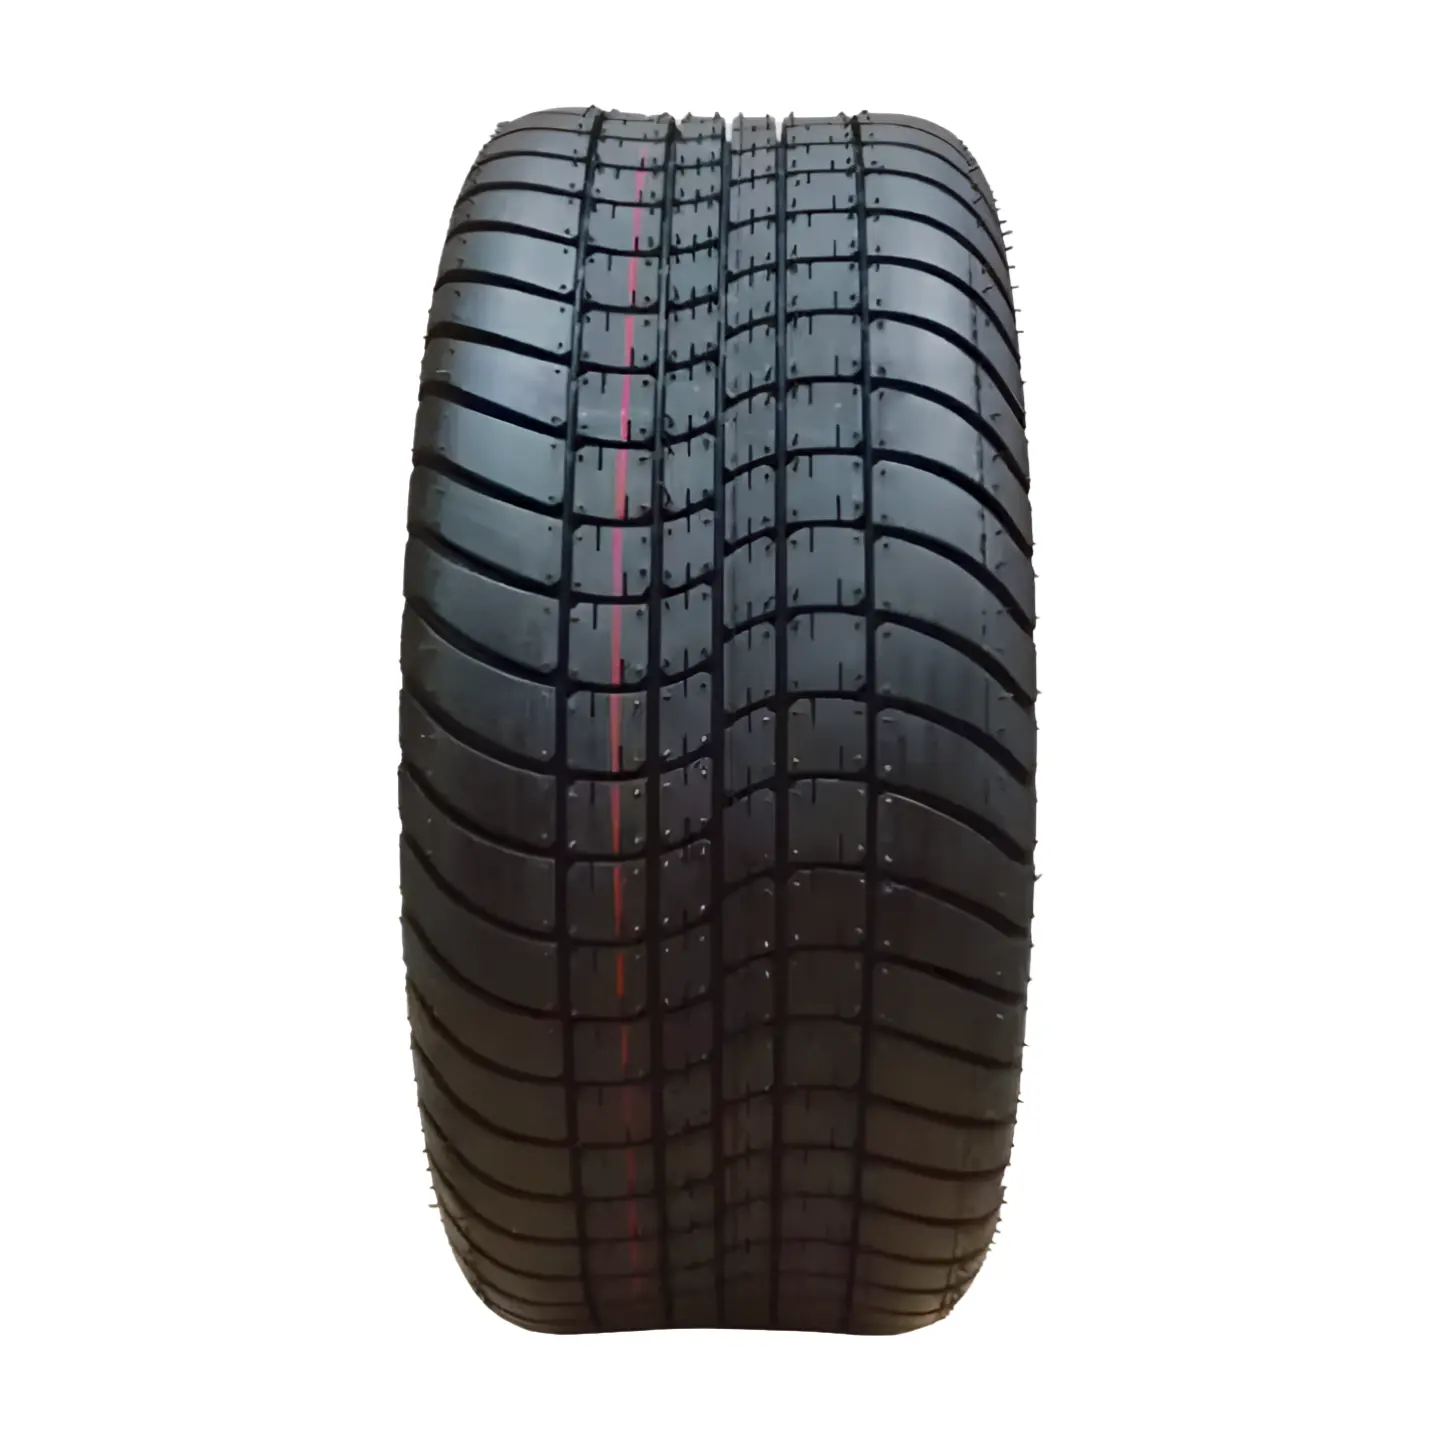 Chinese Top Quality Cheap Price High Quality 185/65/r15 95/65R15 Wheels Bias Light Truck Tires On Sale